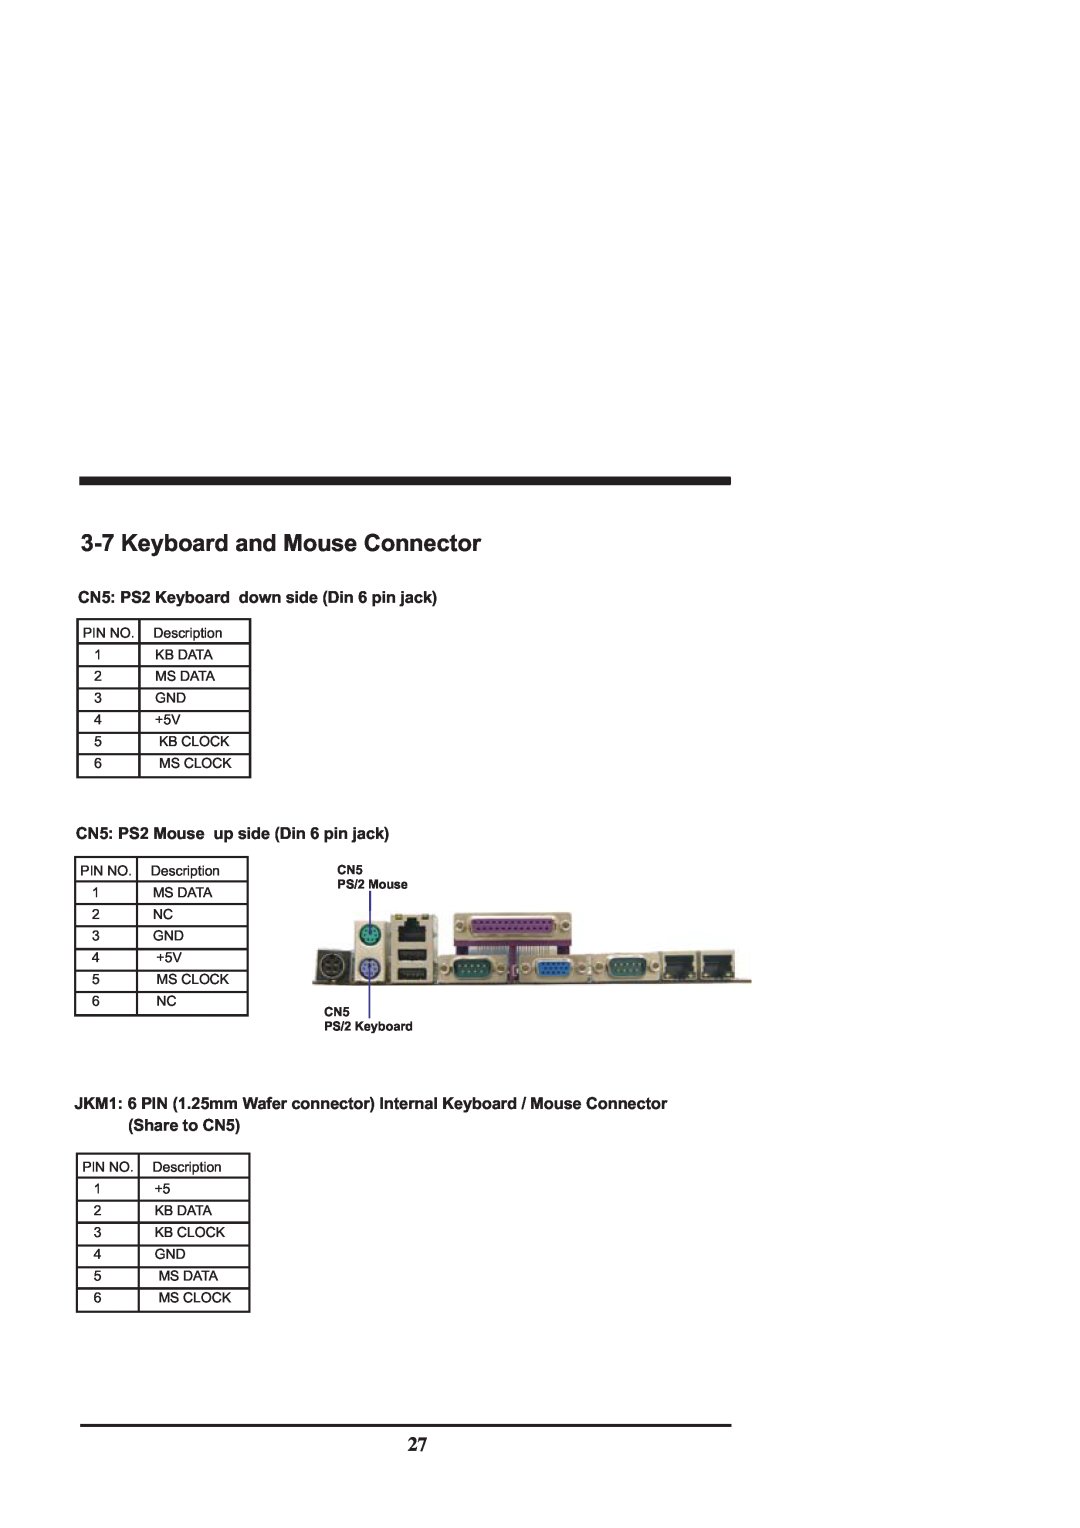 Intel CV702A, CV700A manual 3-7Keyboard and Mouse Connector, CN5: PS2 Keyboard down side Din 6 pin jack 